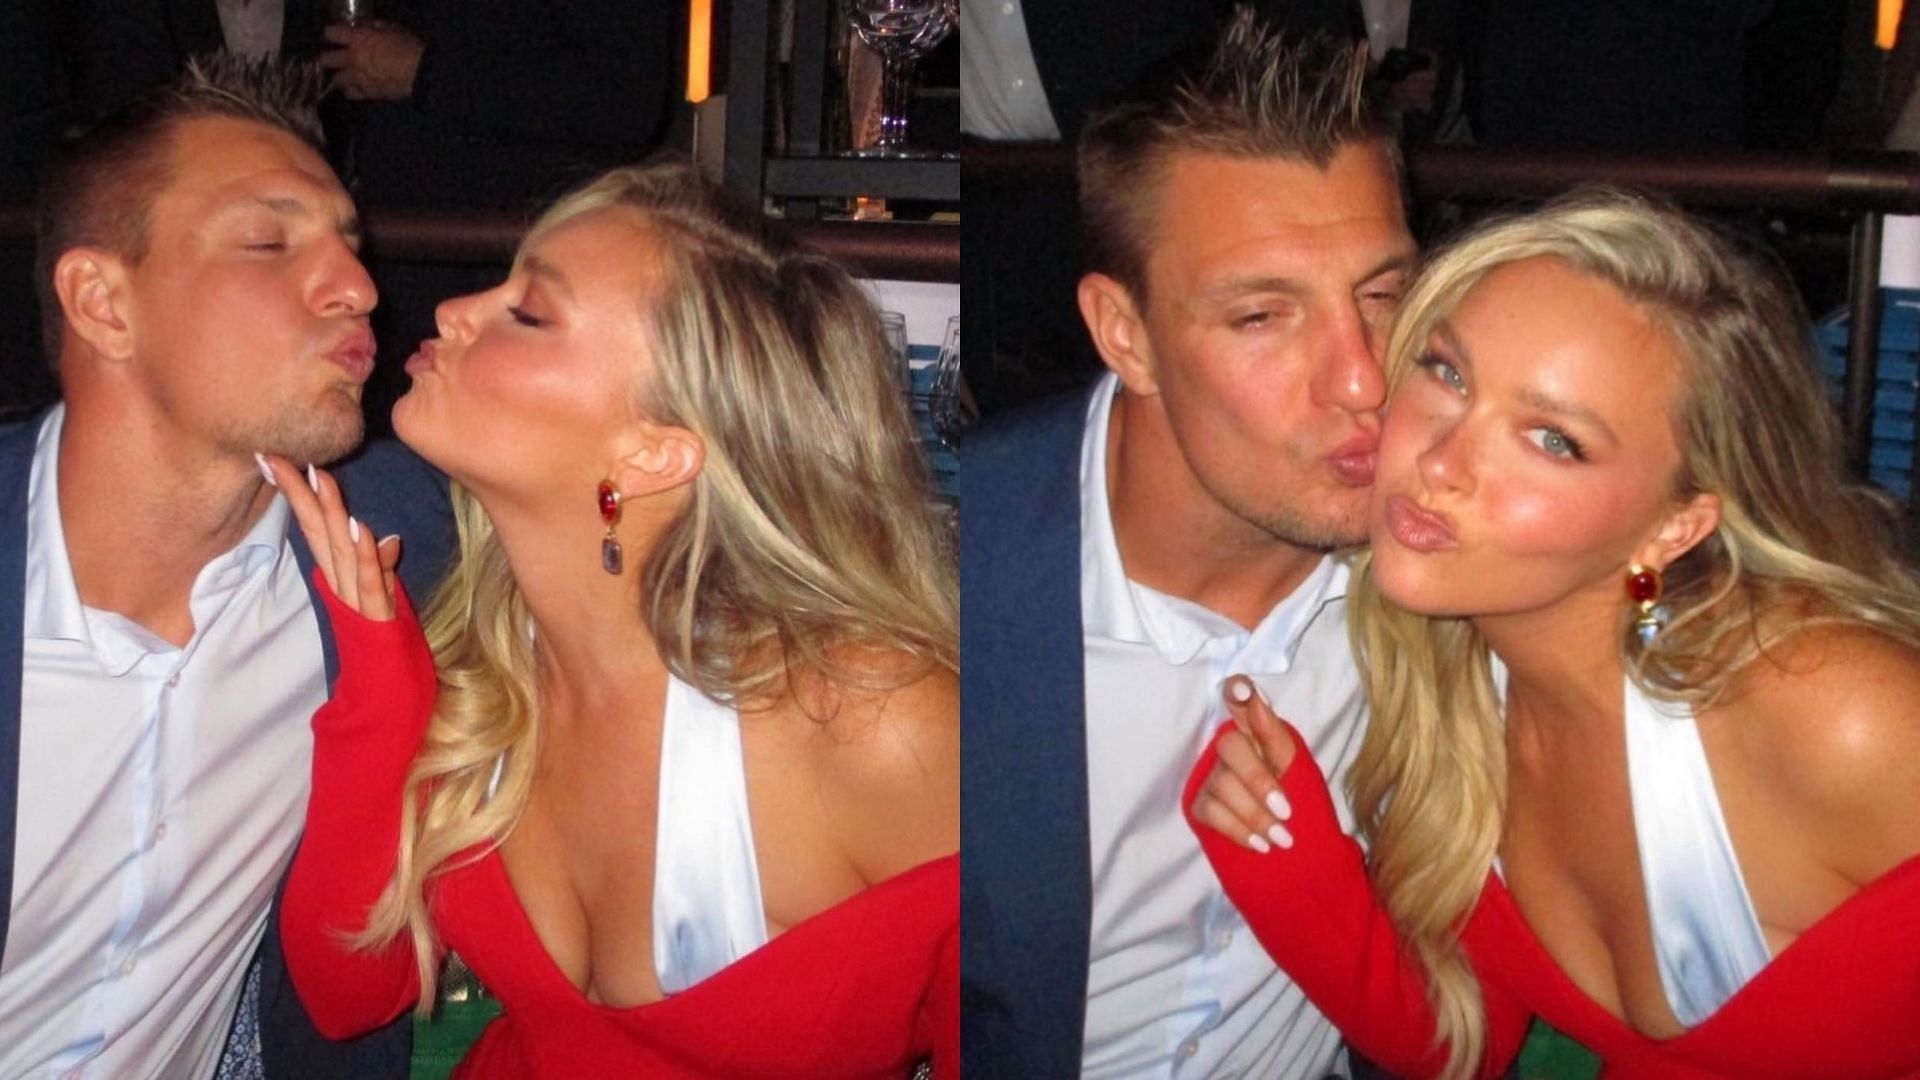 Rob Gronkowski and Camille Kostek during their New Year Party